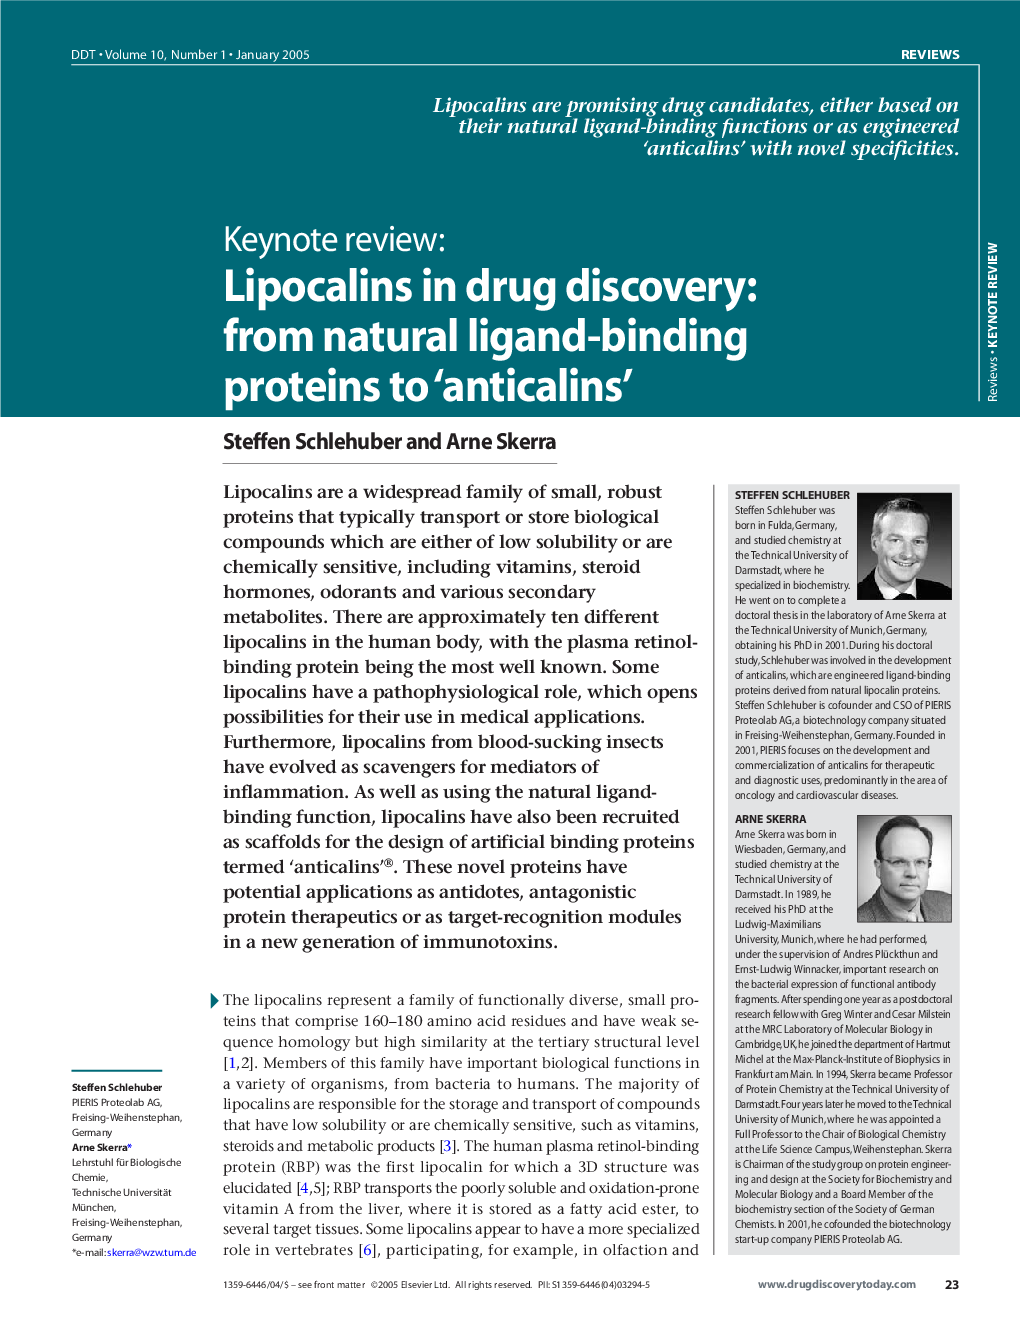 Lipocalins in drug discovery: From natural ligand-binding proteins to 'anticalins'